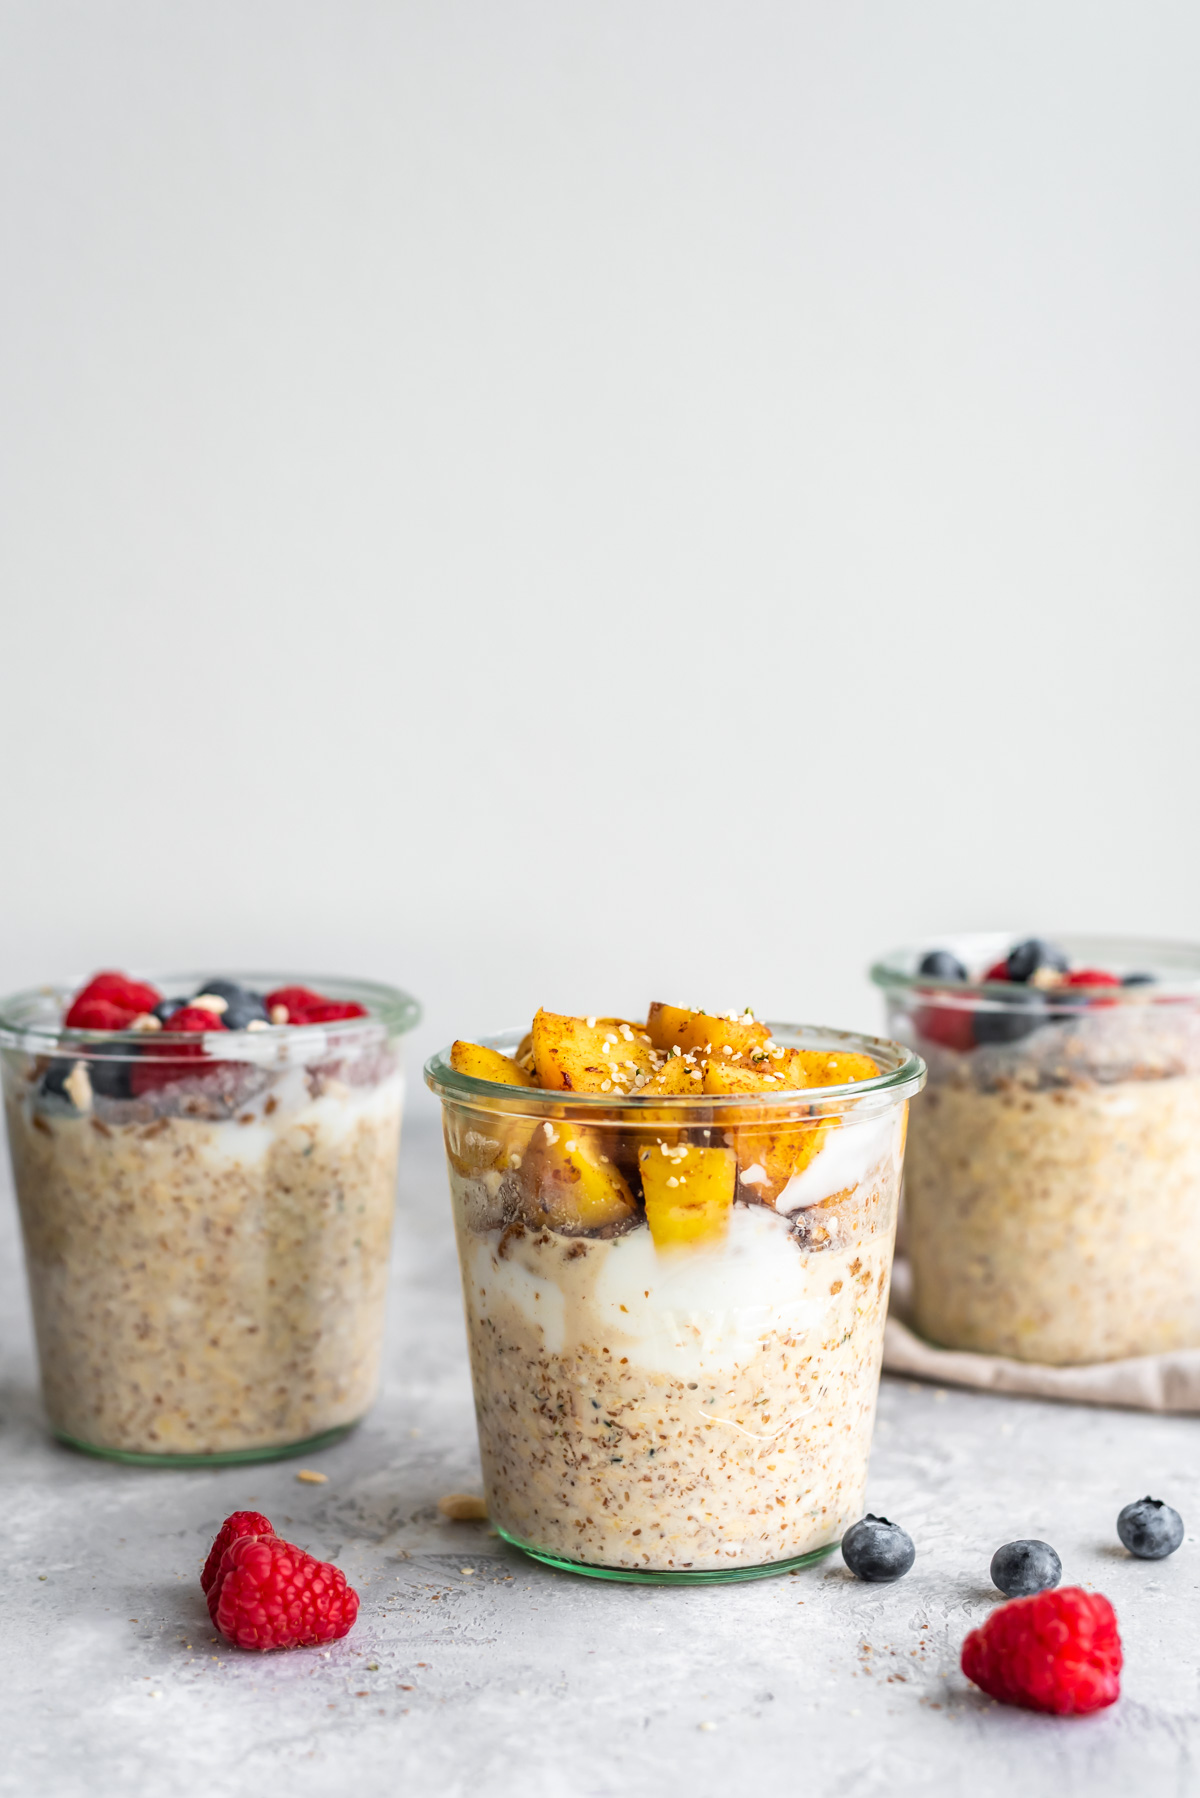 3 jars of overnight oats with different toppings like stewed apples and fresh berries.